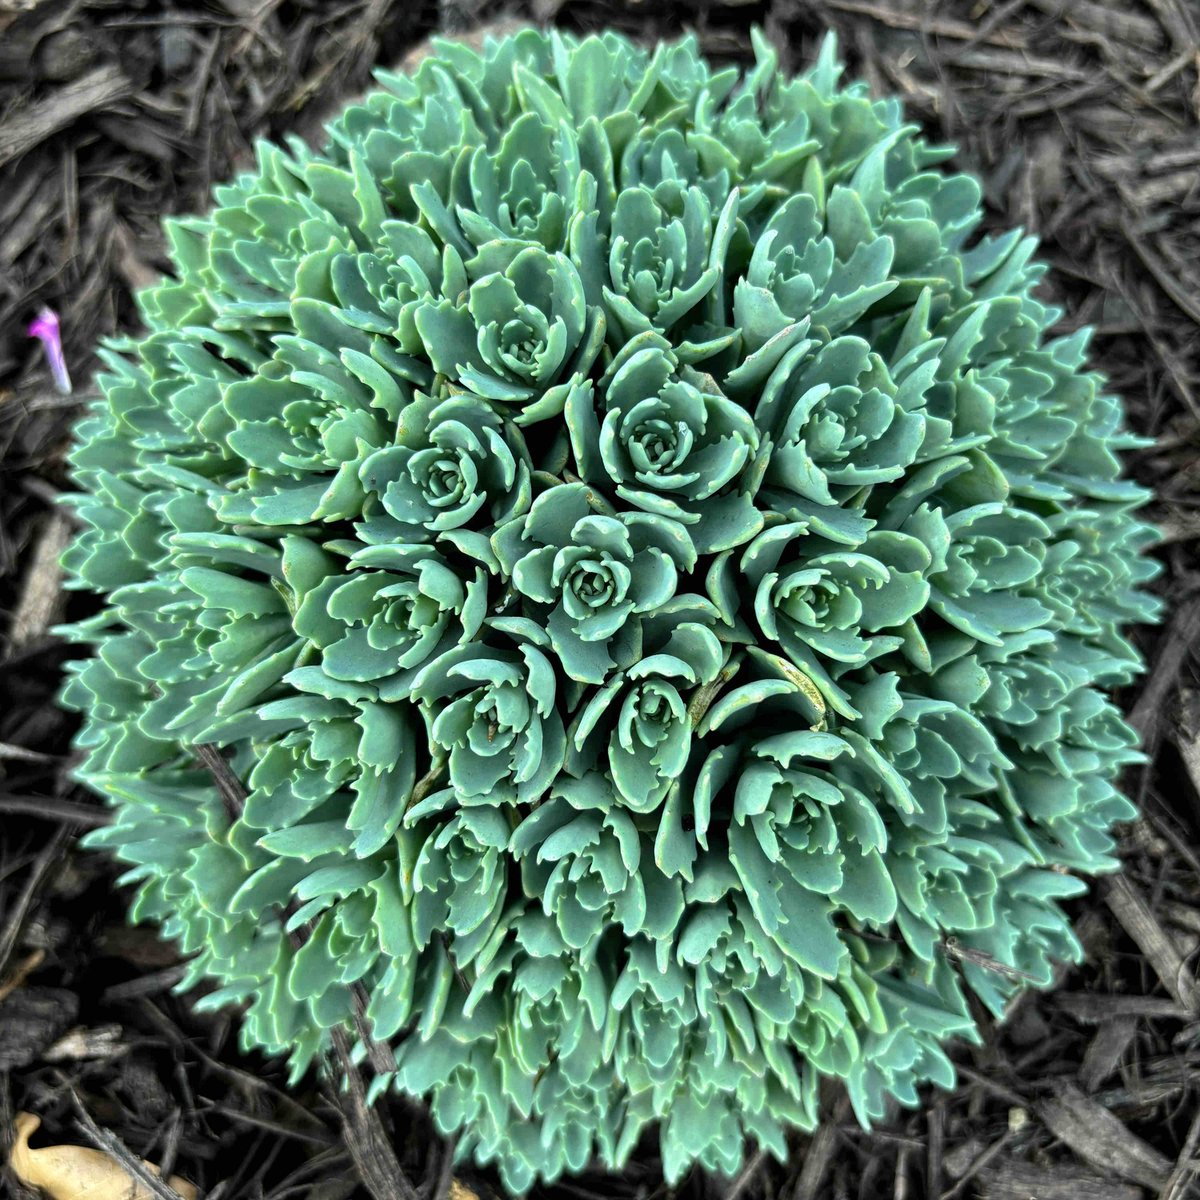 Sedum Pachyclados Round
.
The succulent whorl of the sedum can be seductive to draw you closer. Look how each swirling leaf is adorned with three small teeth. Does your pachyclados bite?
.
05.16.24
#rounddujour #sedum #sedumpachyclados #succulent #rosette
RoundMuseum.com